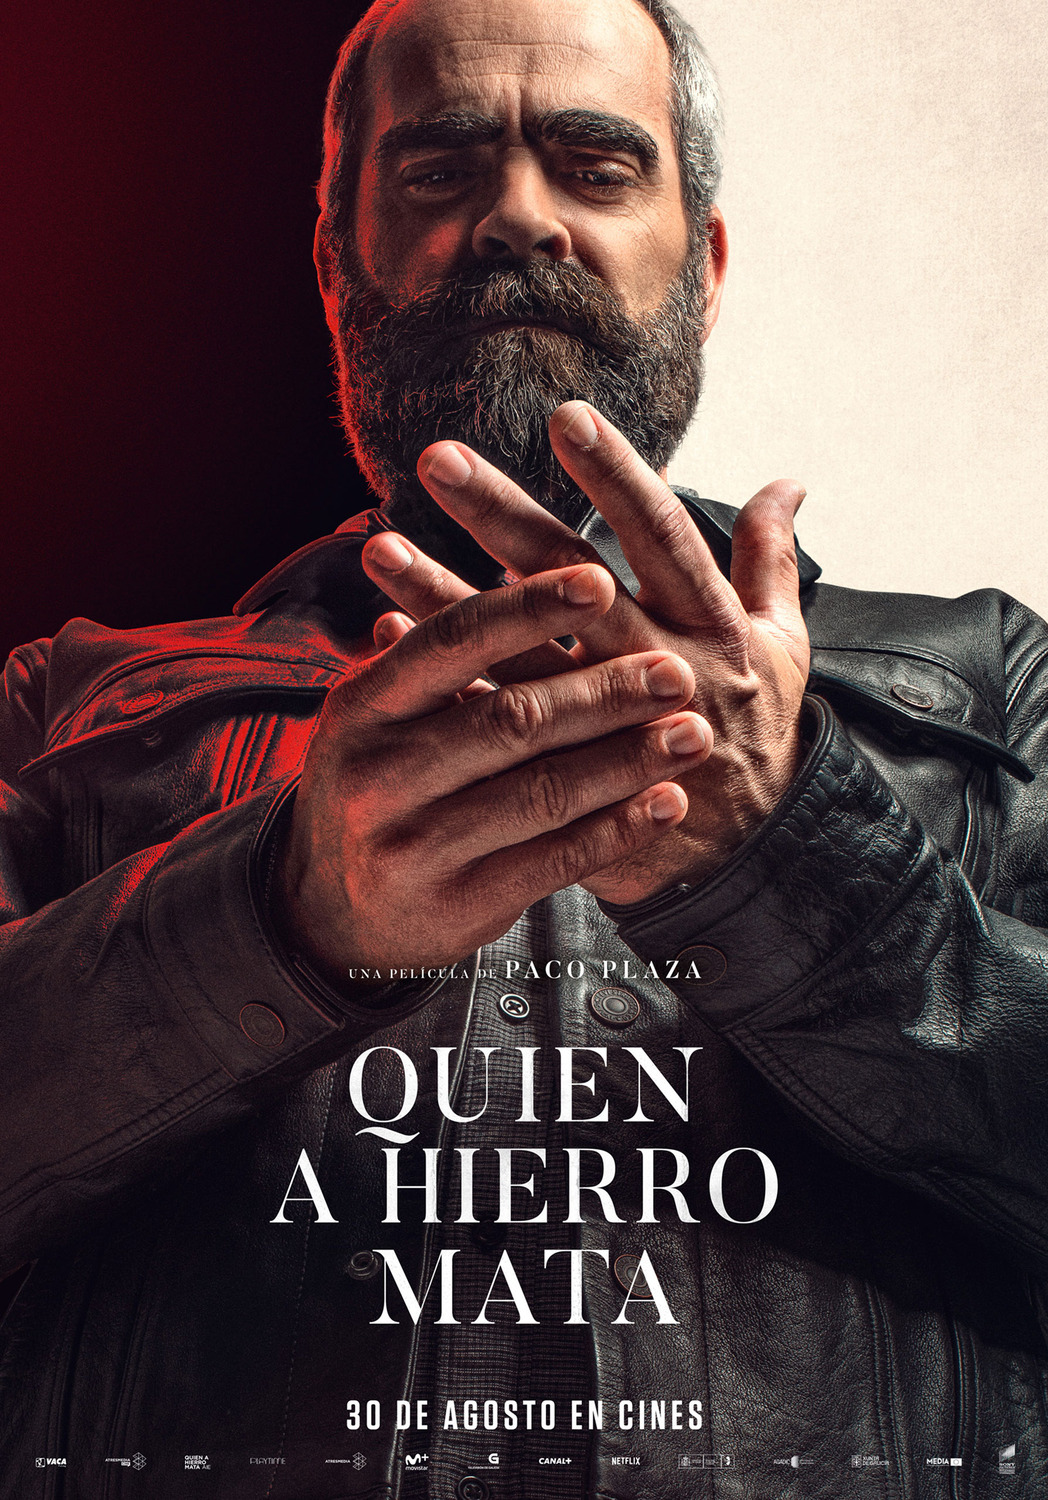 Extra Large Movie Poster Image for Quien a hierro mata 